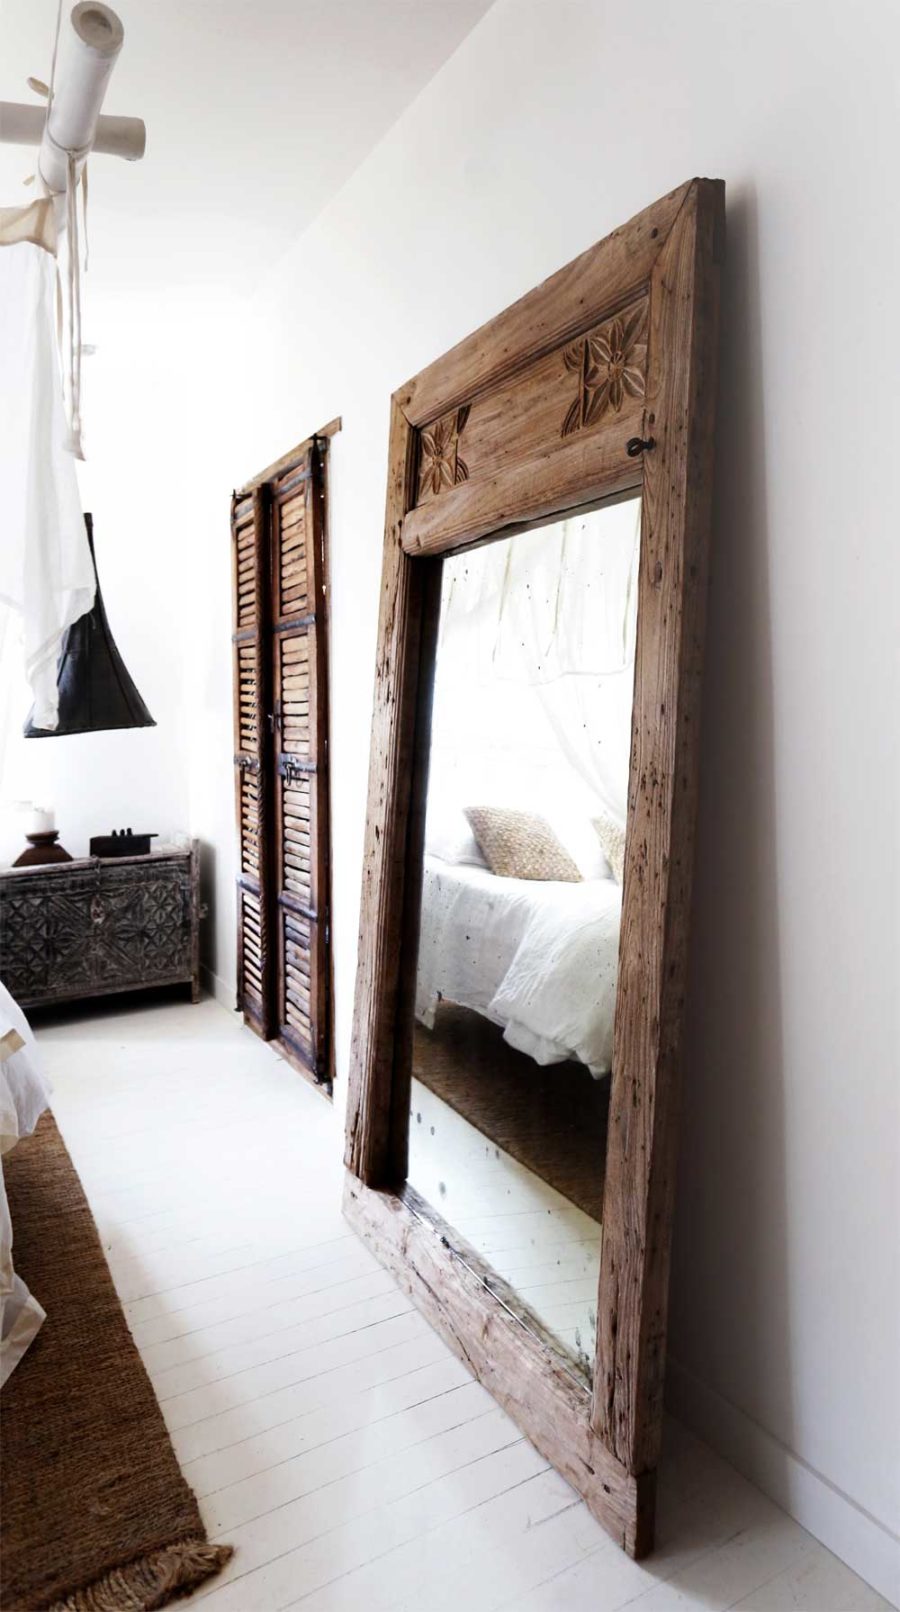 Bedroom Mirror Designs That Reflect Personality